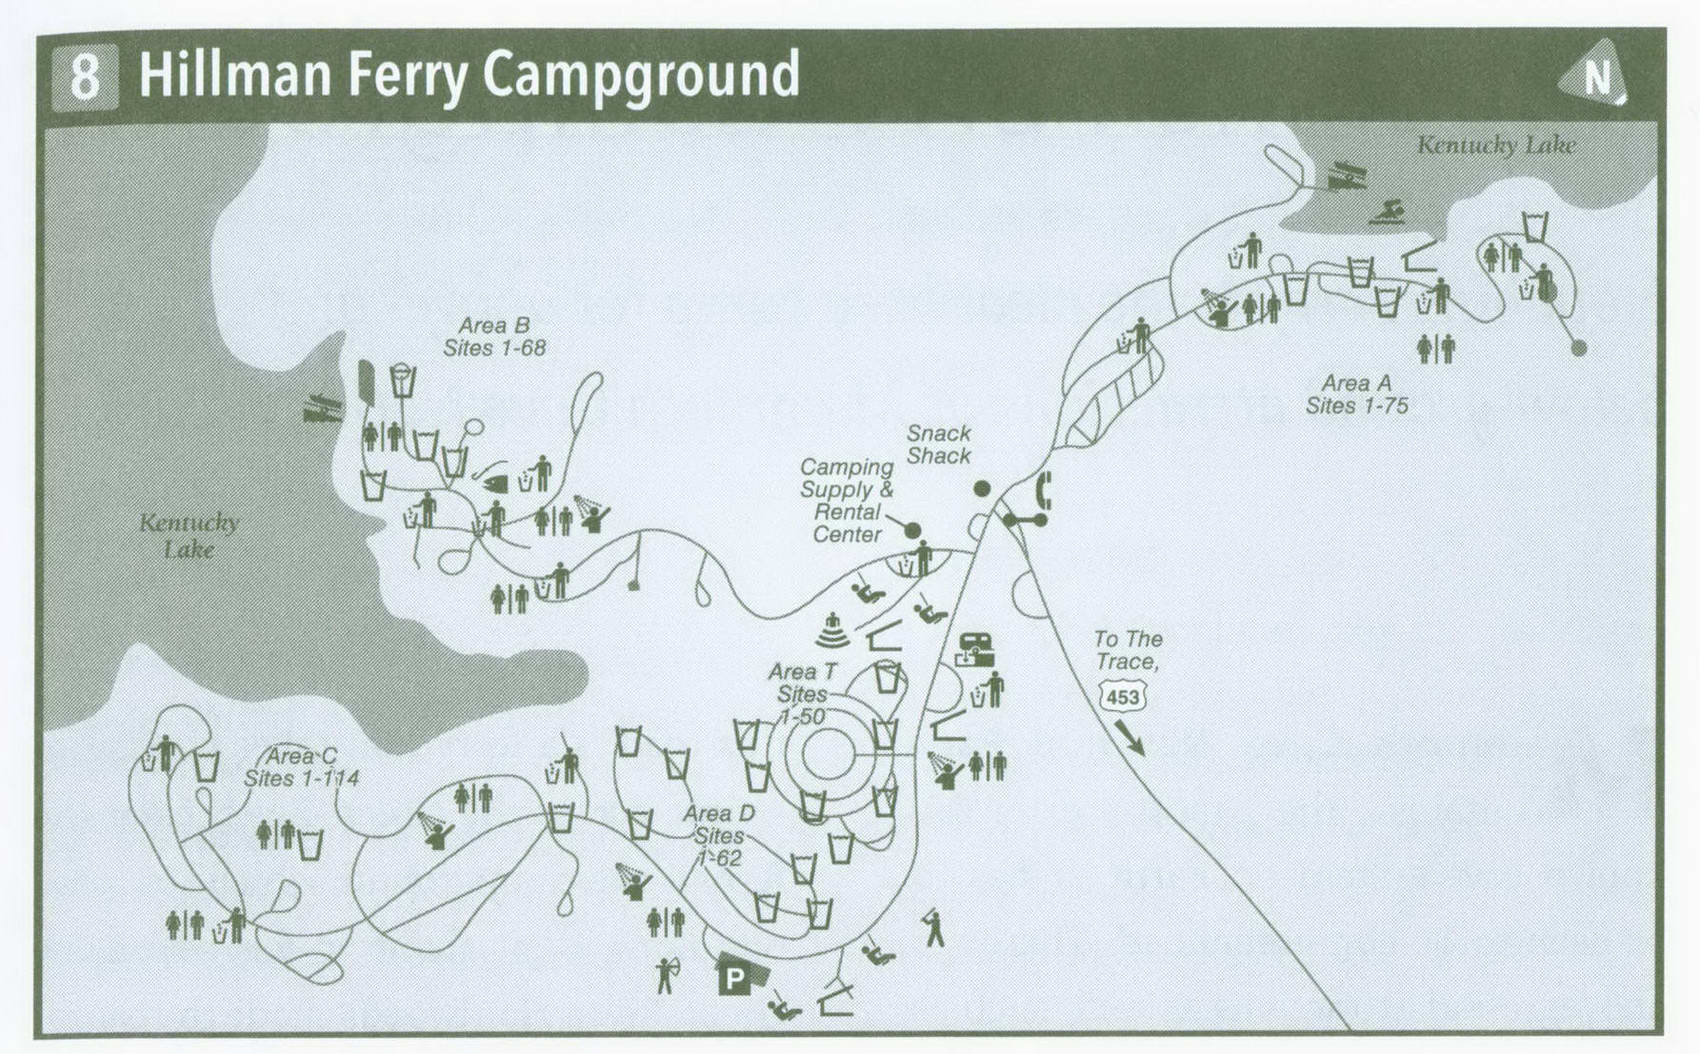 Ferry hillman campground ky coe lakes land between rvparking nf rating kentucky lake site